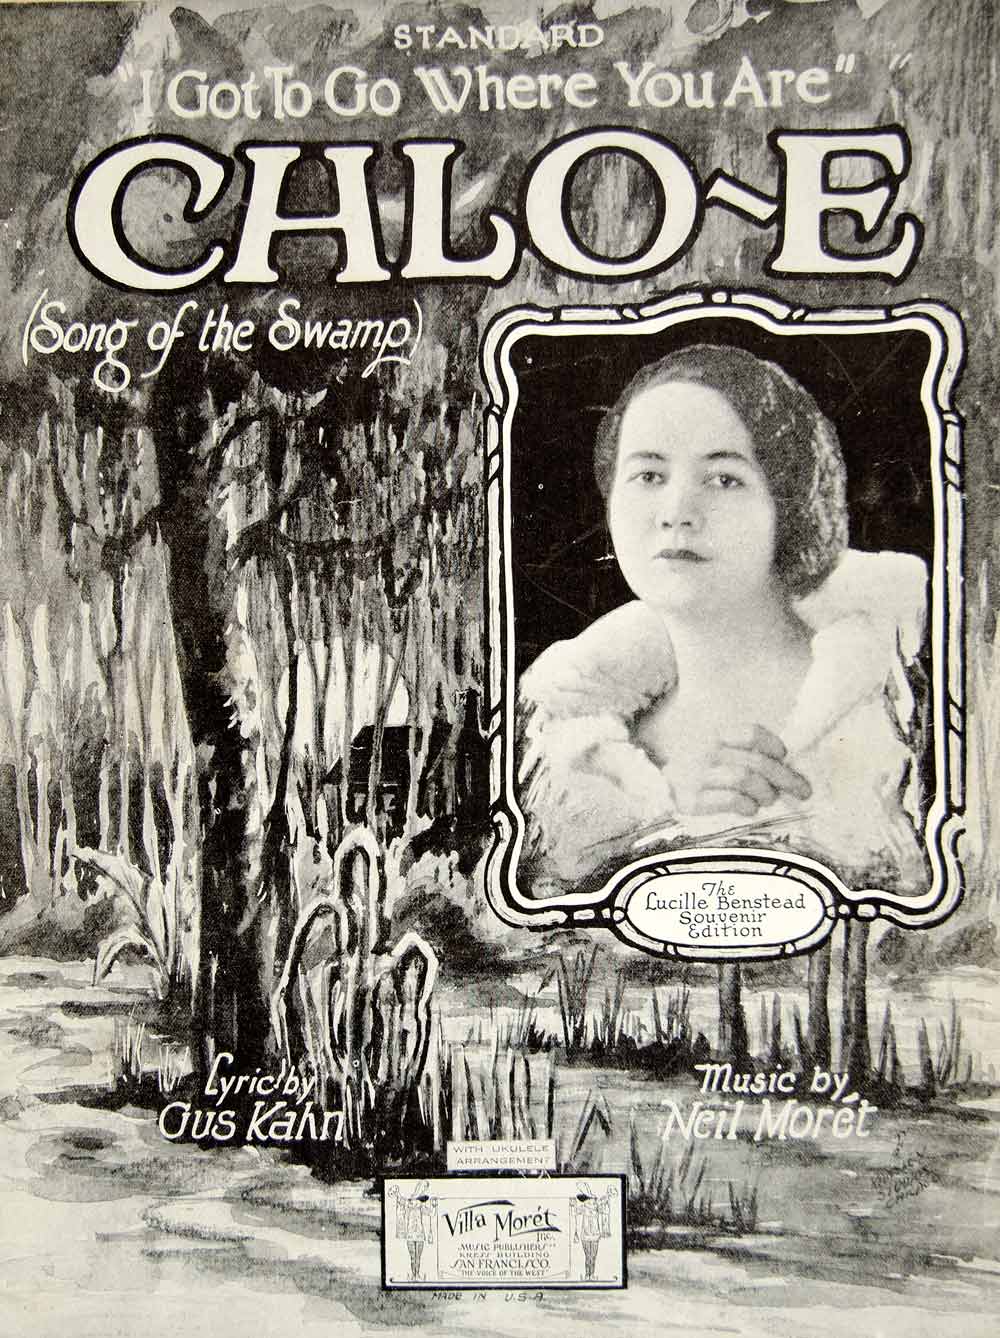 1927 Sheet Music I Got to Go Where You Are Chloe Swamp Lucille Benstead ZSMA1